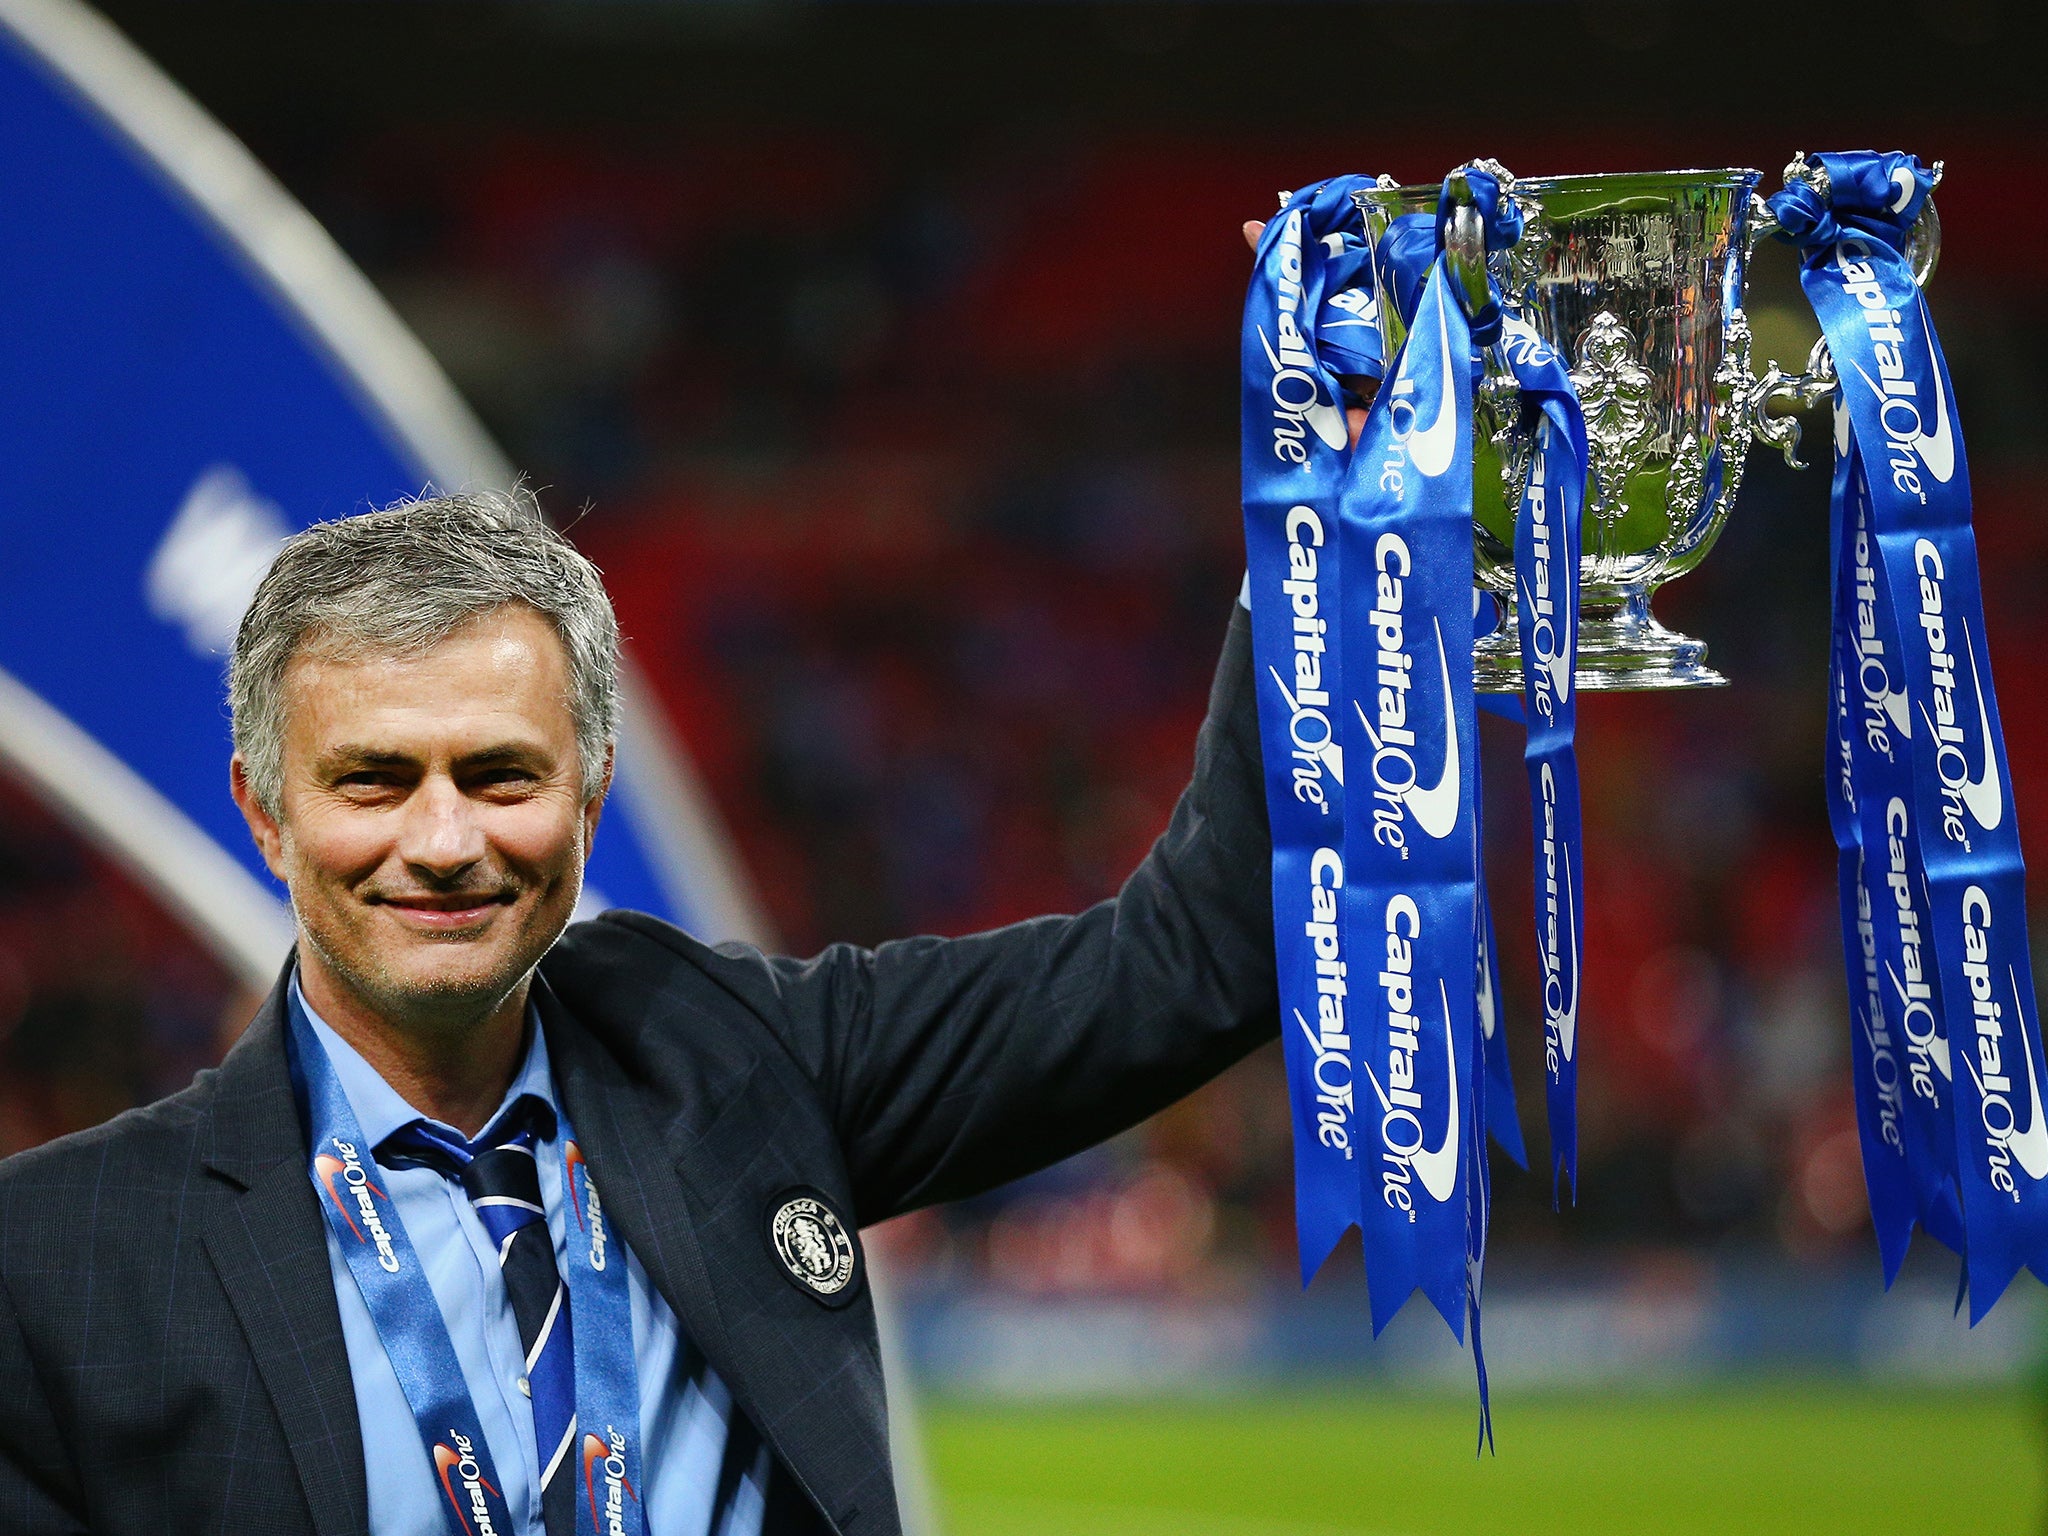 Jose Mourinho with the cup last season - Chelsea were knocked out last night